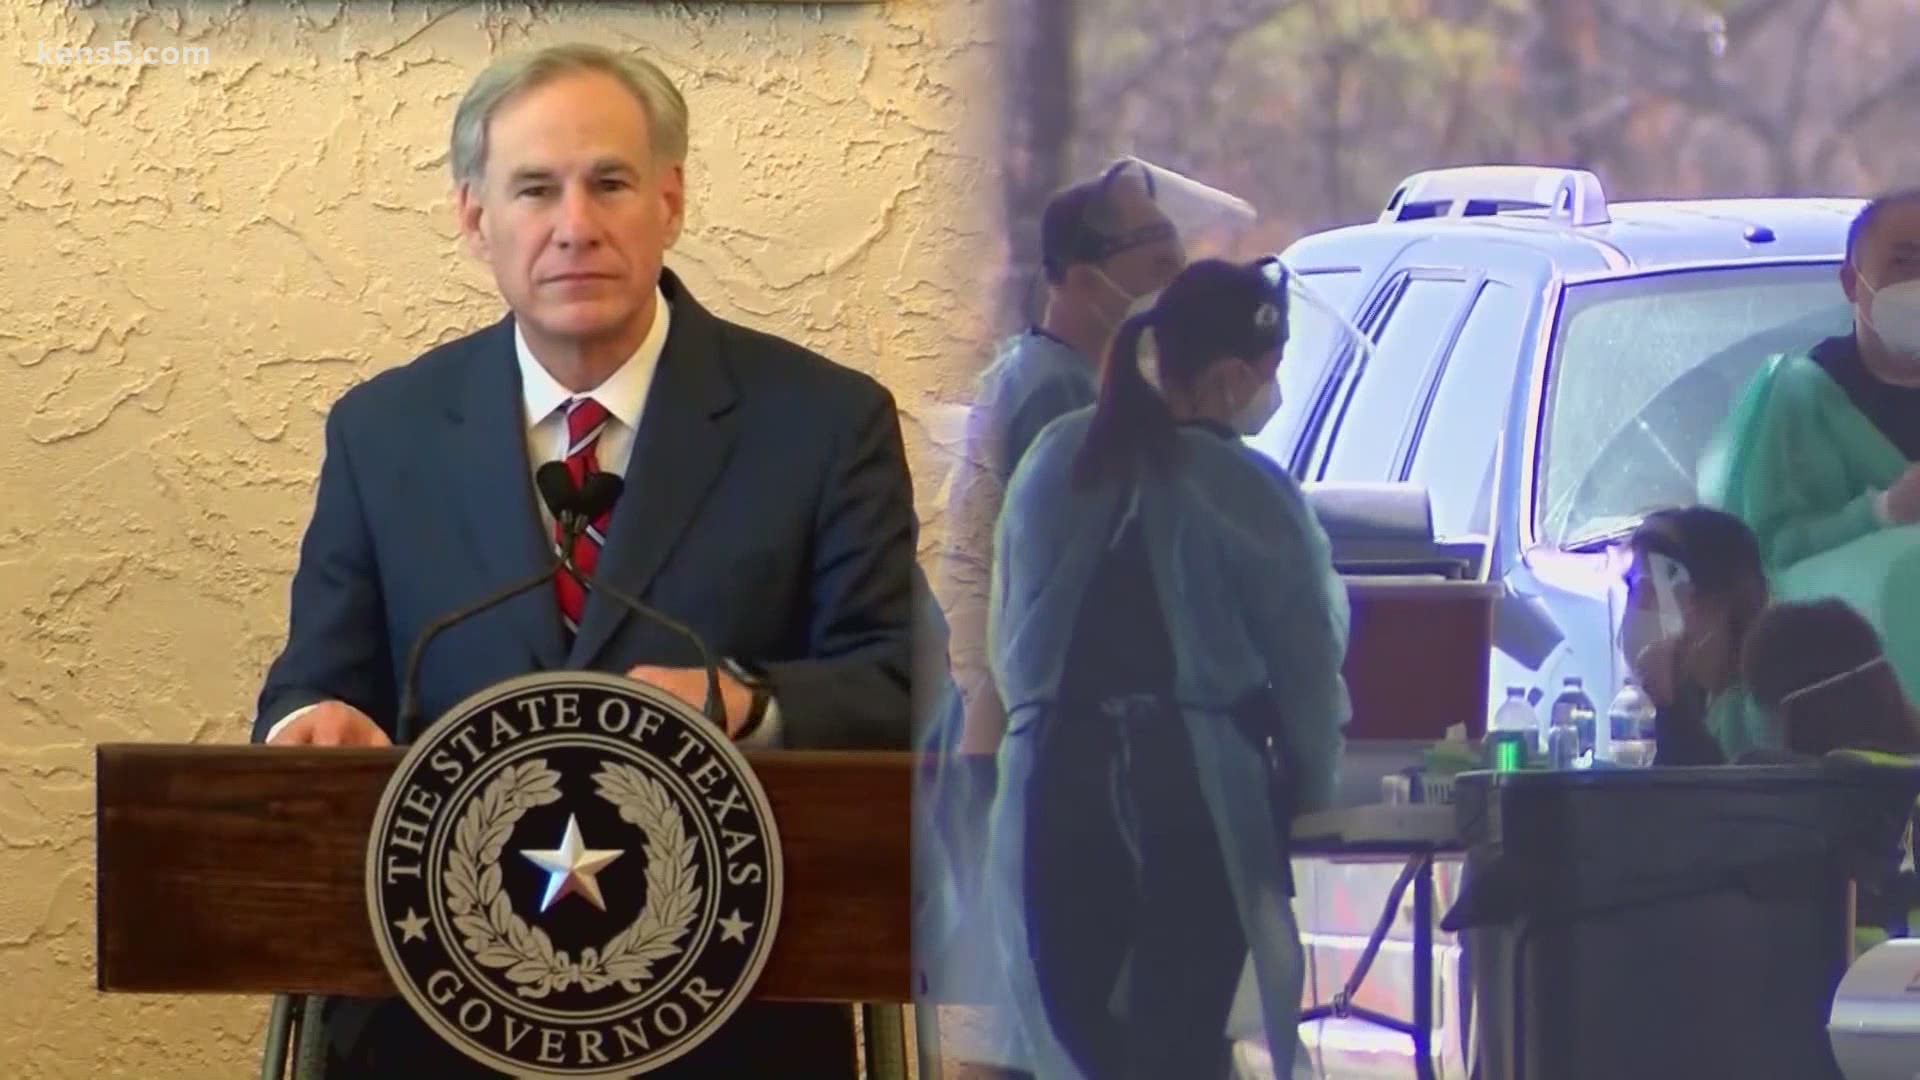 One former chief epidemiologist said Gov. Abbott's decision is "absurd" and "inconsistent regarding where we are at the pandemic at this moment."